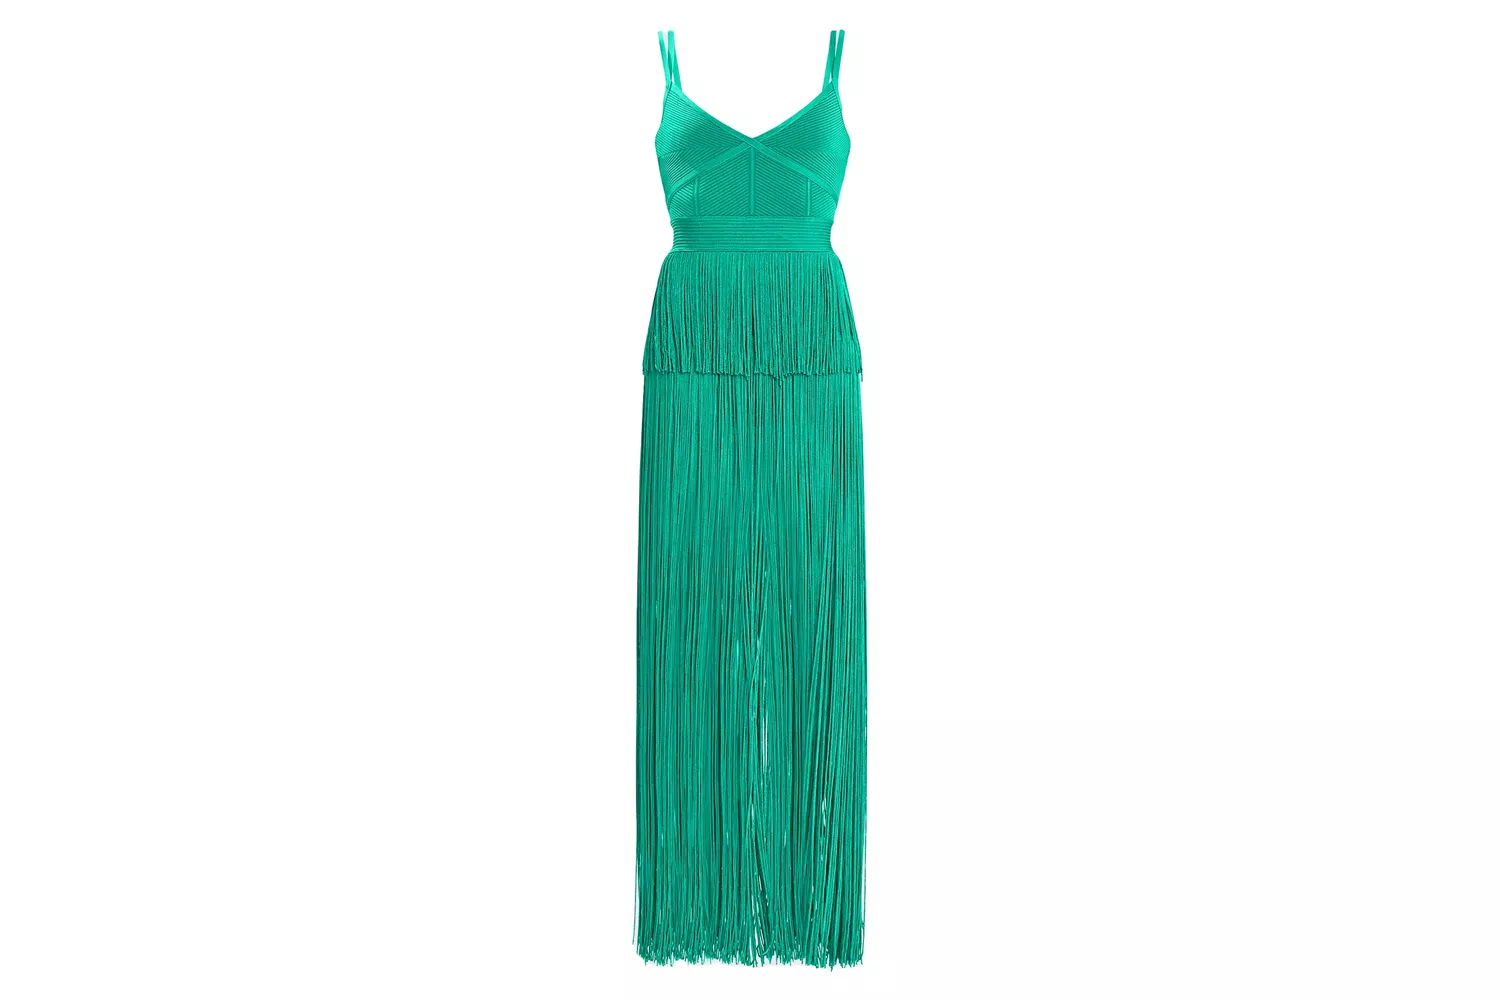 Herve Leger Strappy Ottoman Fringe Gown